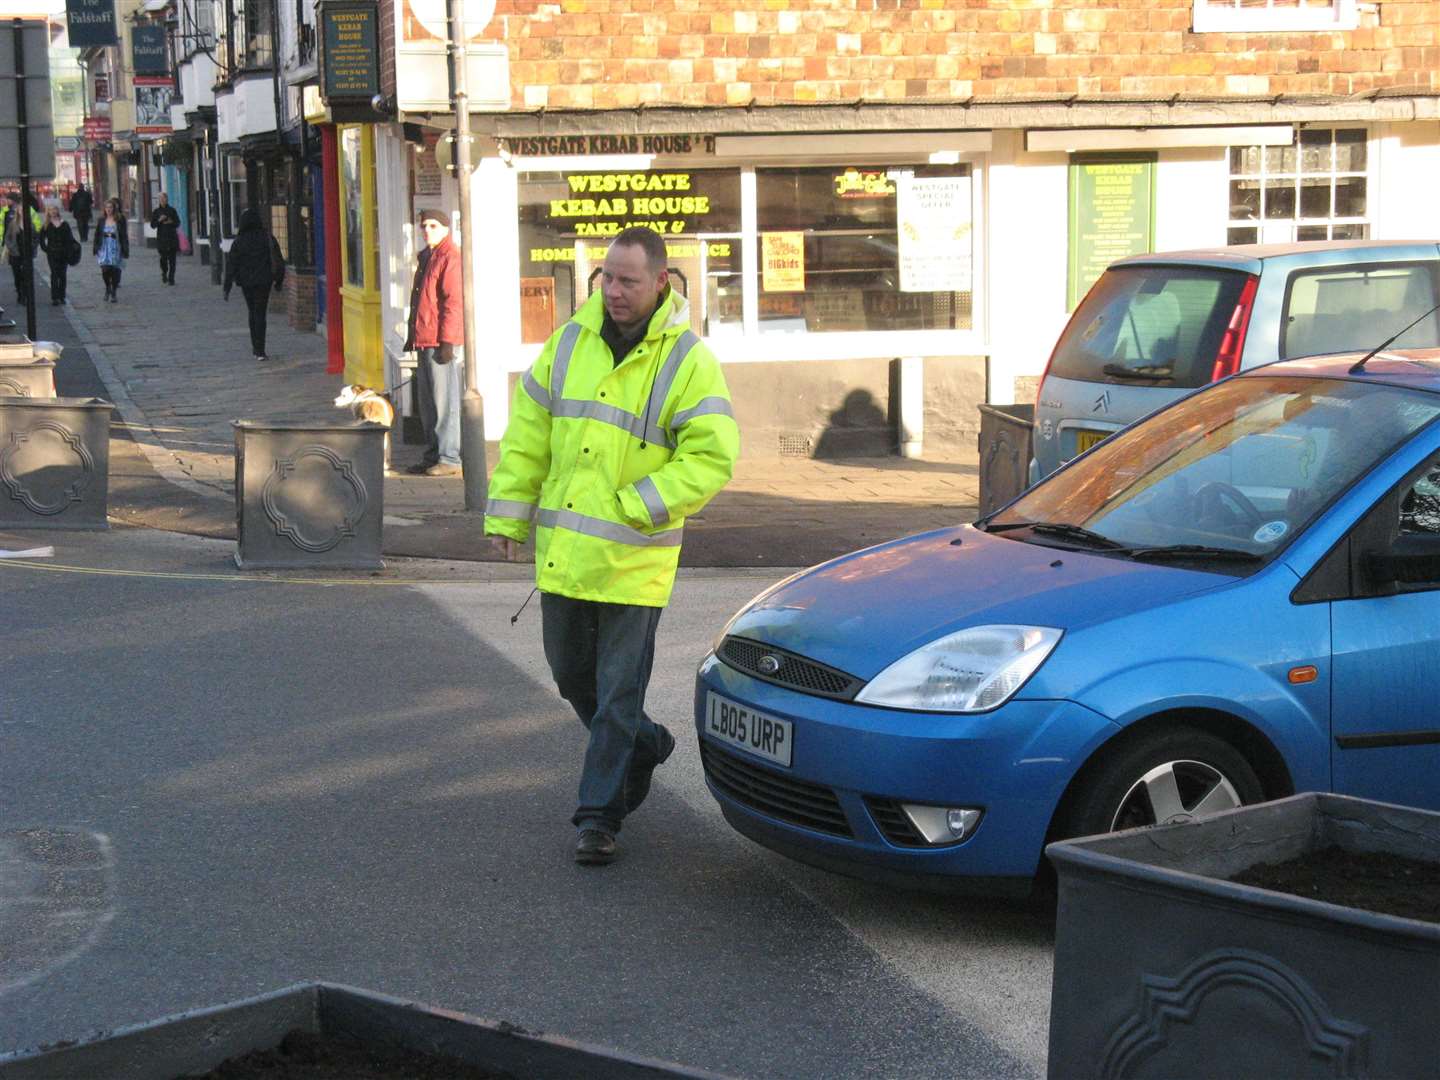 Wardens had their hands full attempting to direct confused drivers on the first day